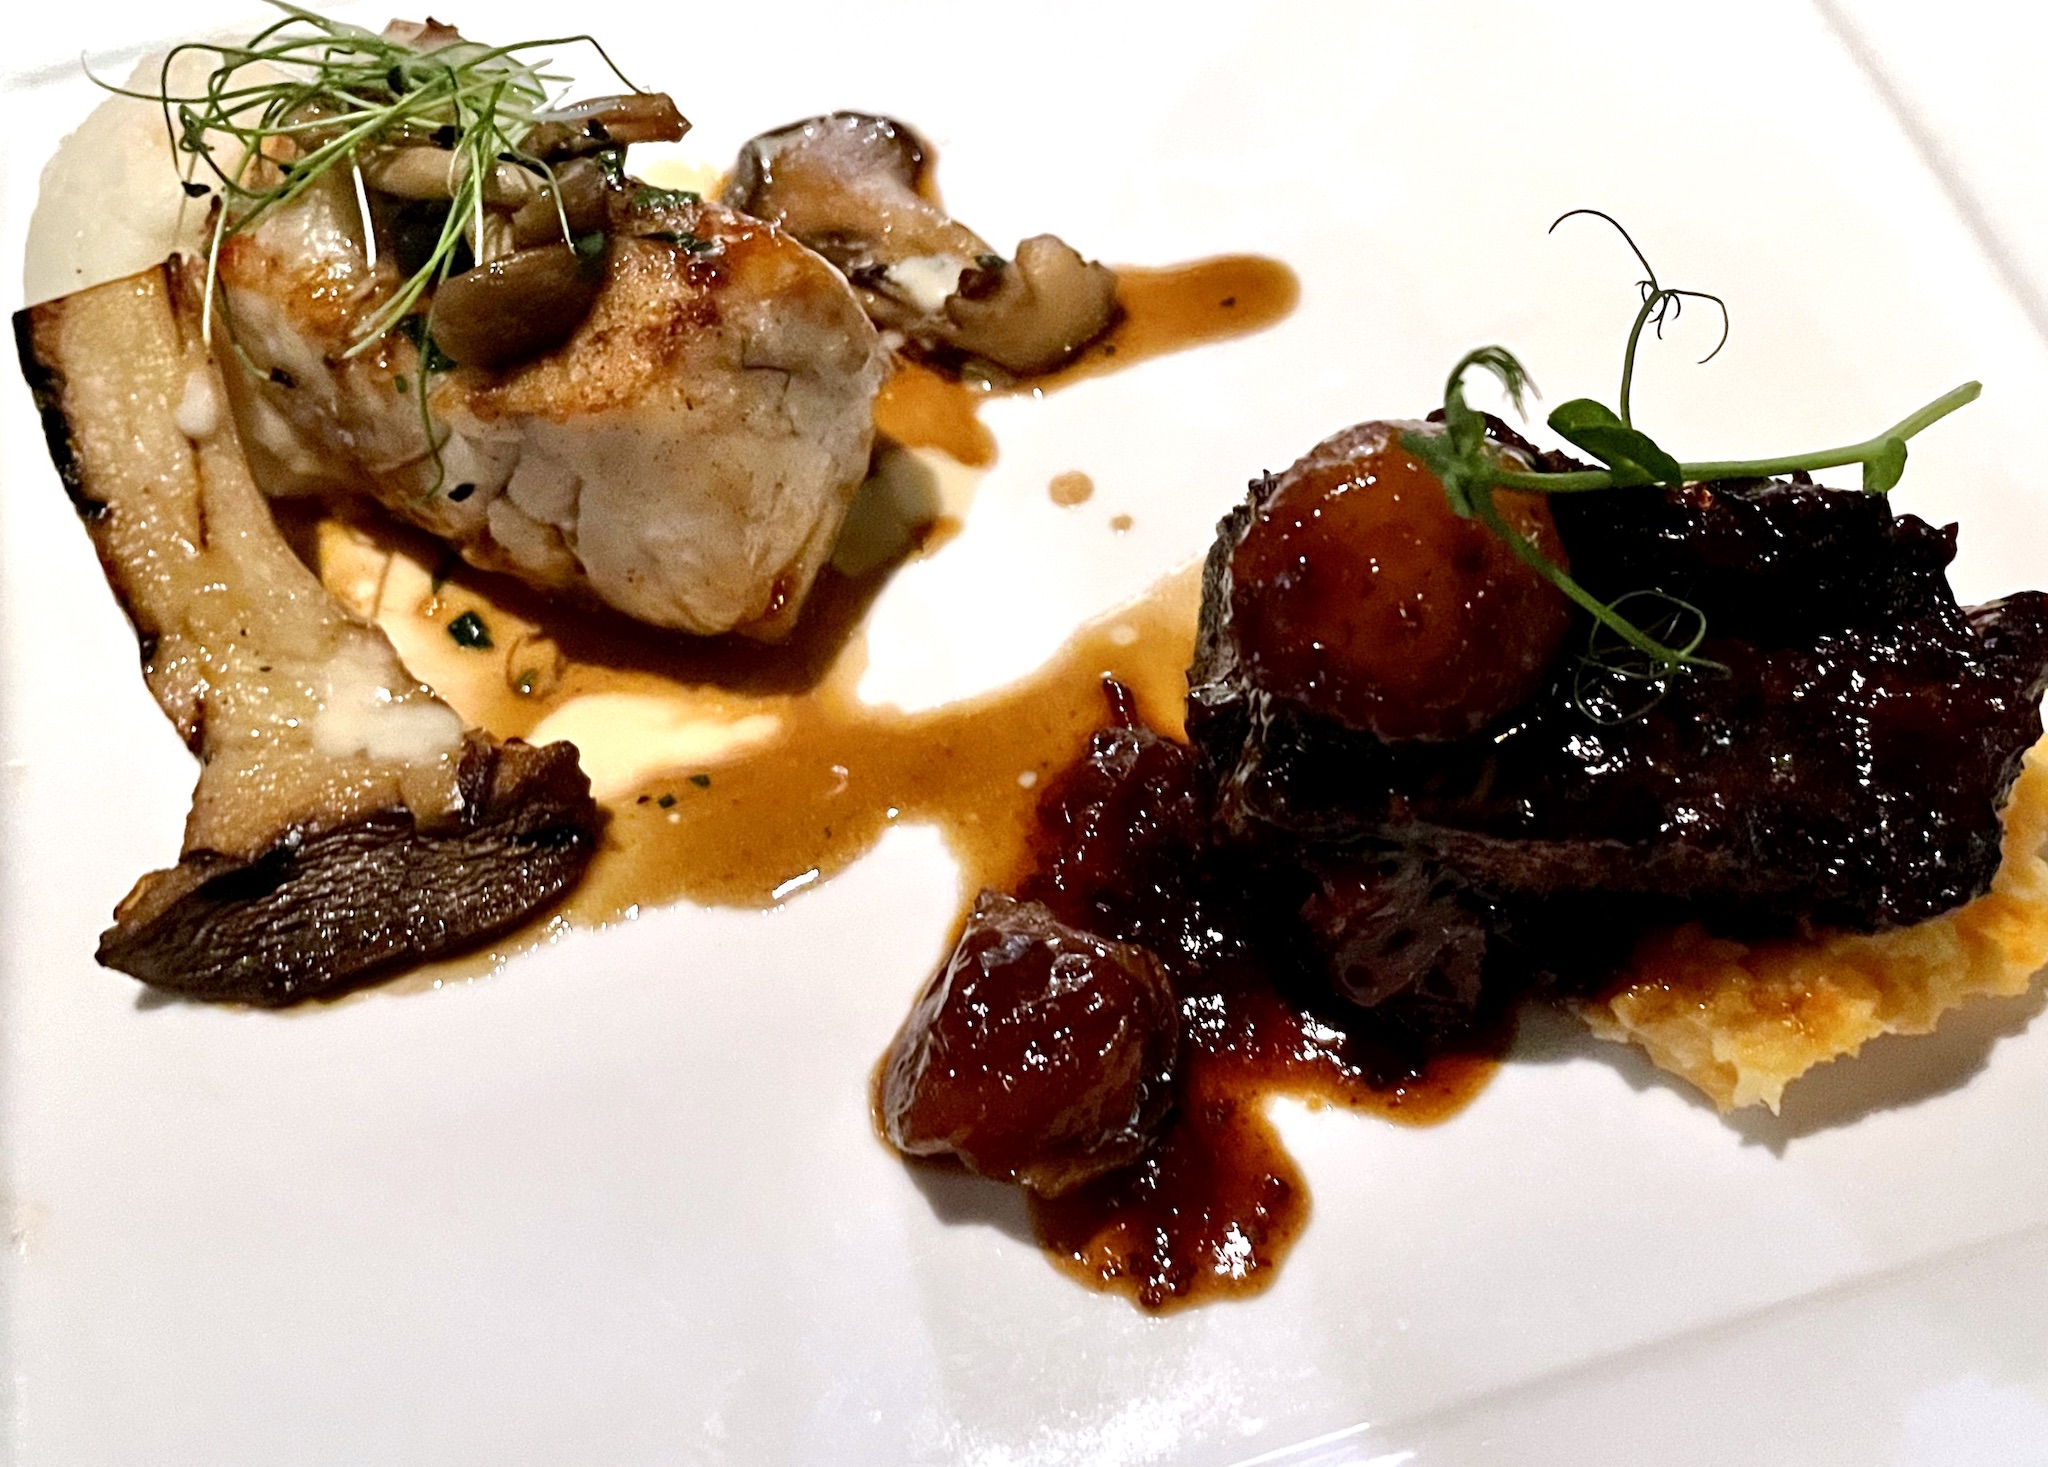 Sea Salt - Grouper with wild mushrooms brown butter glaze; Braised short rib with caramelized pearl onions on a bed of root vegetables